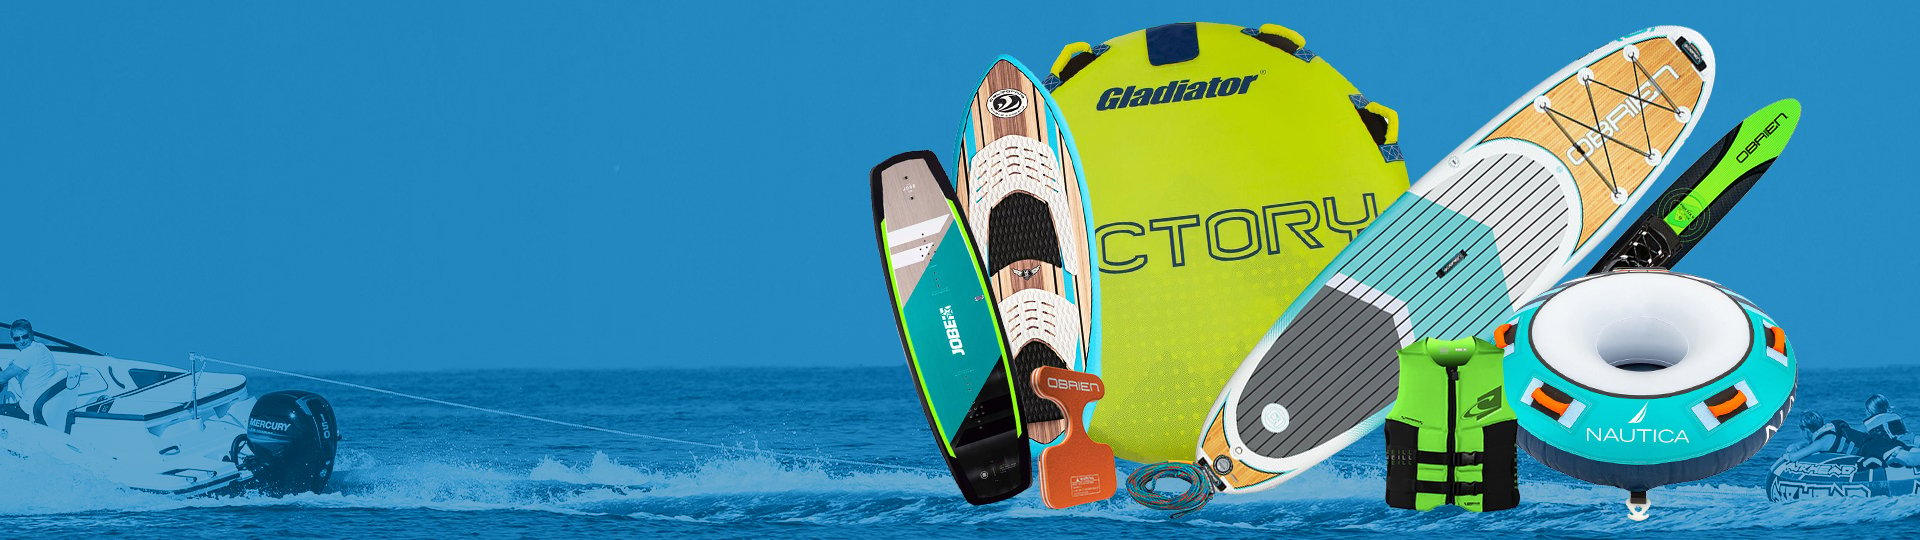 Save up to 50% on the largest assortment of watersports gear